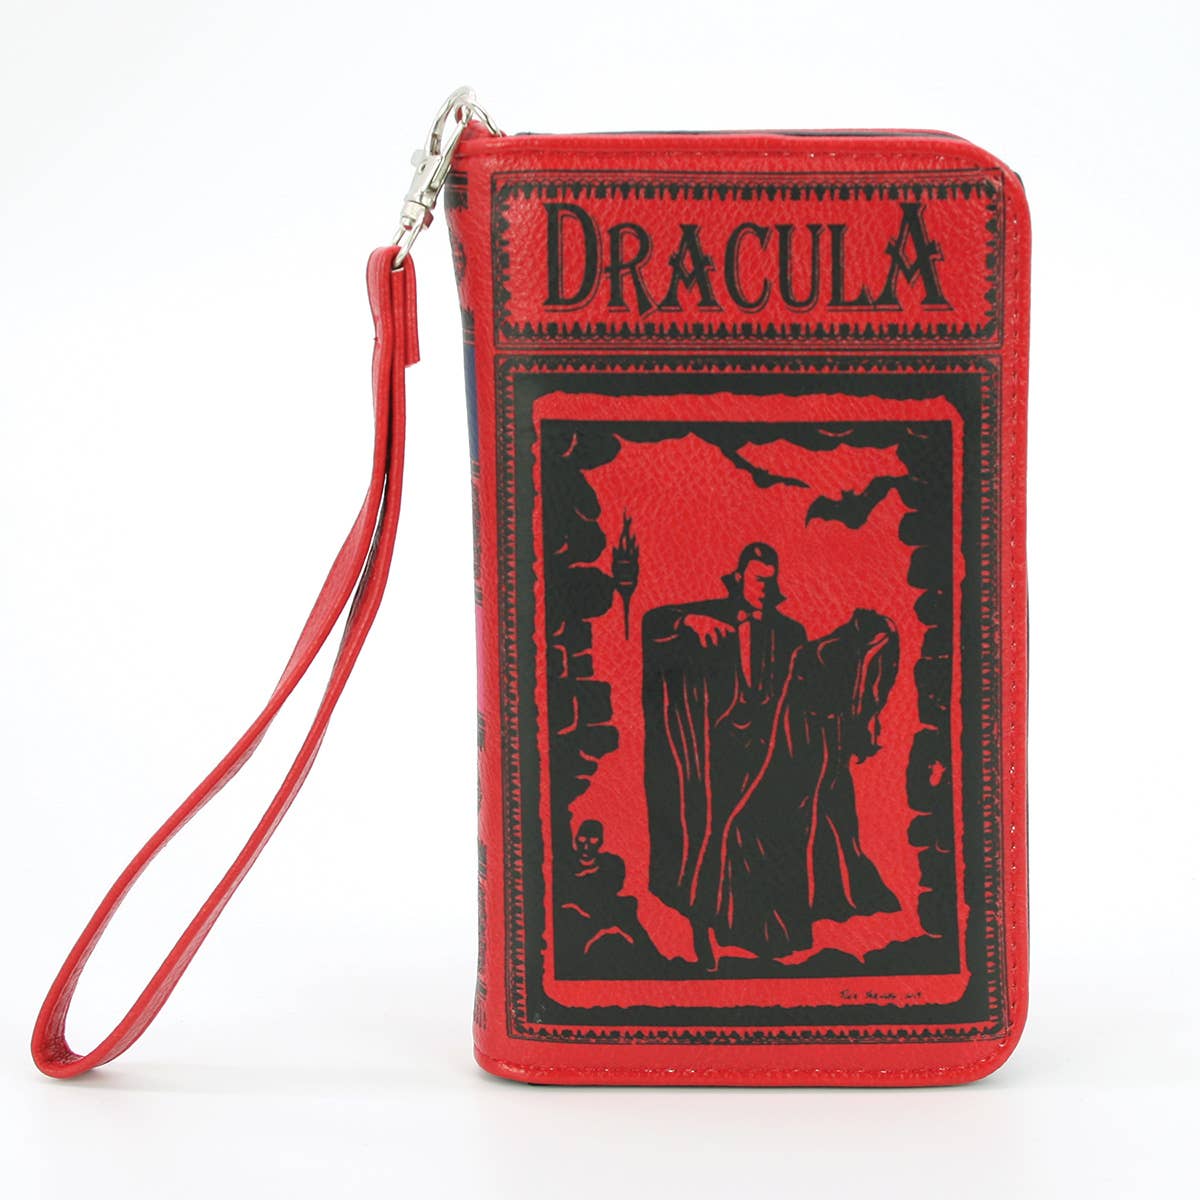 Dracula Story Book Vinyl Red and Black Wallet